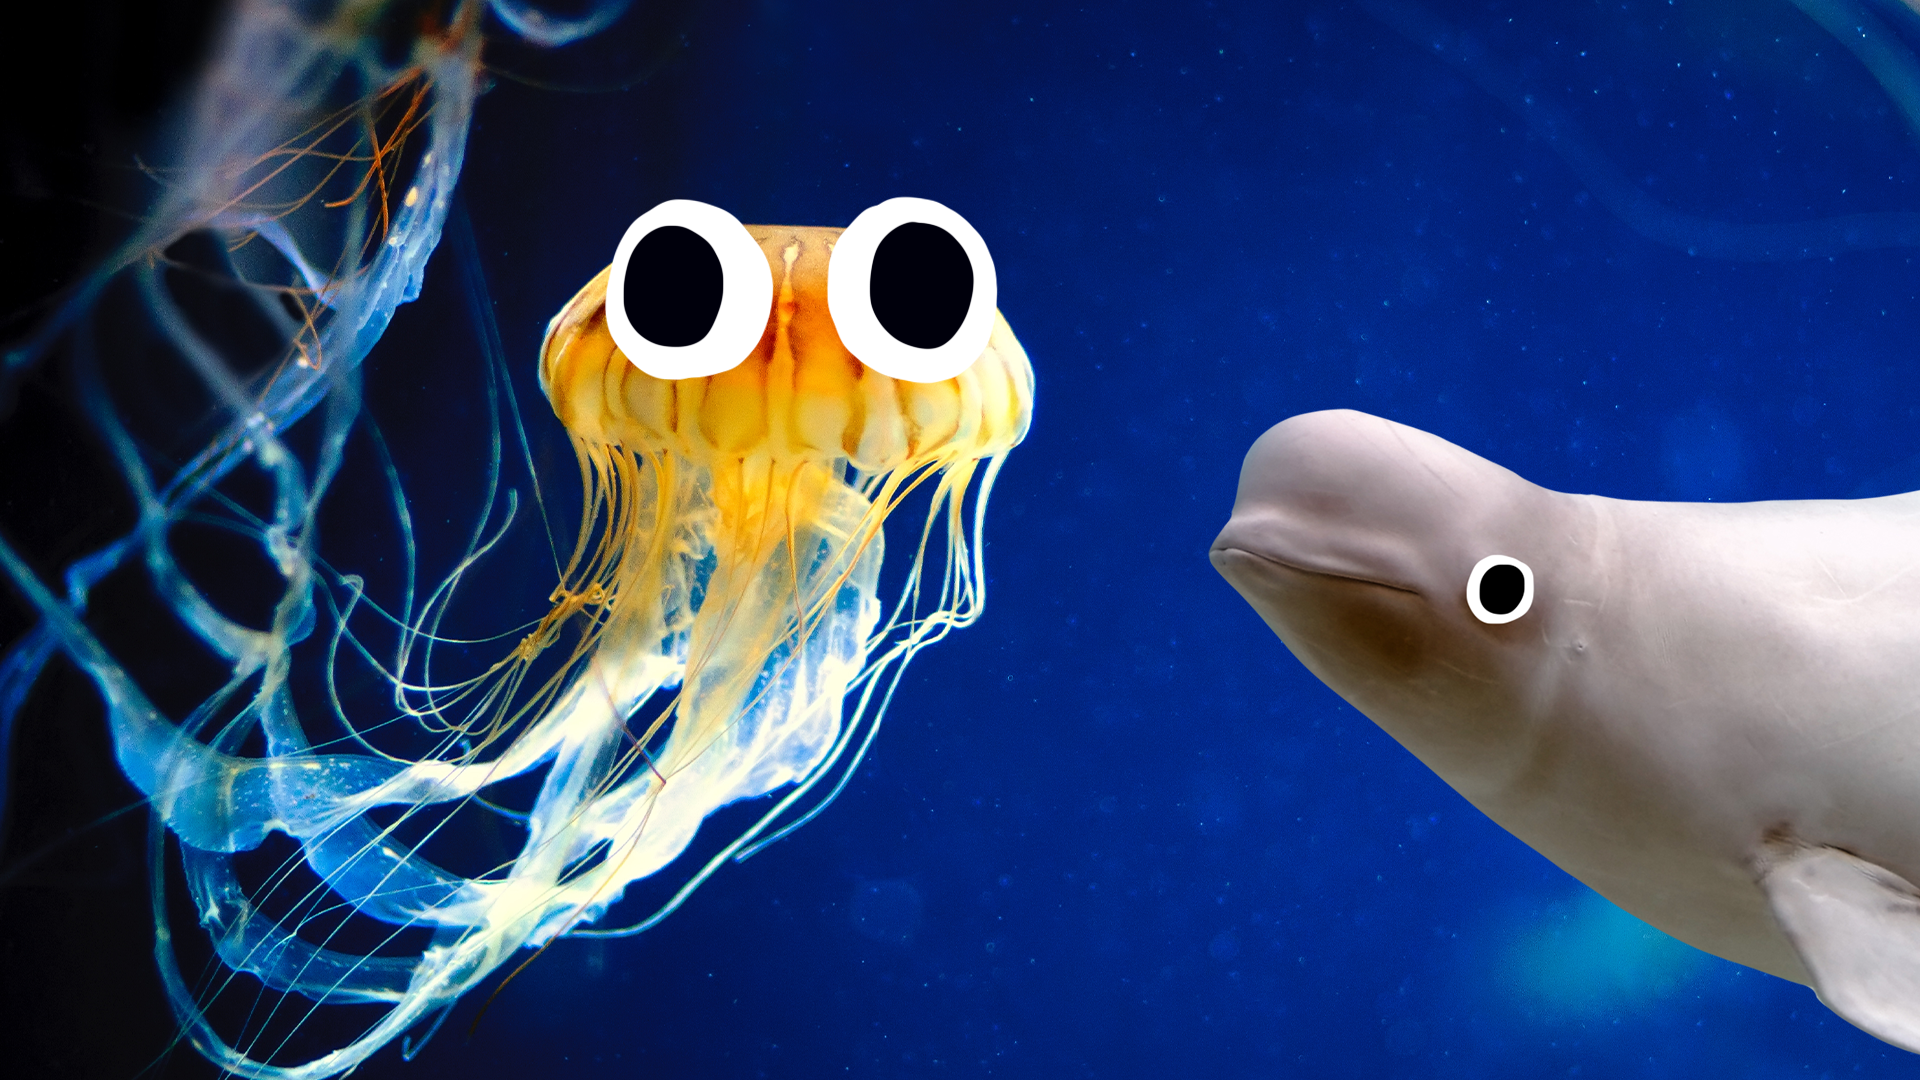 Jellyfish with eyes and beluga wale